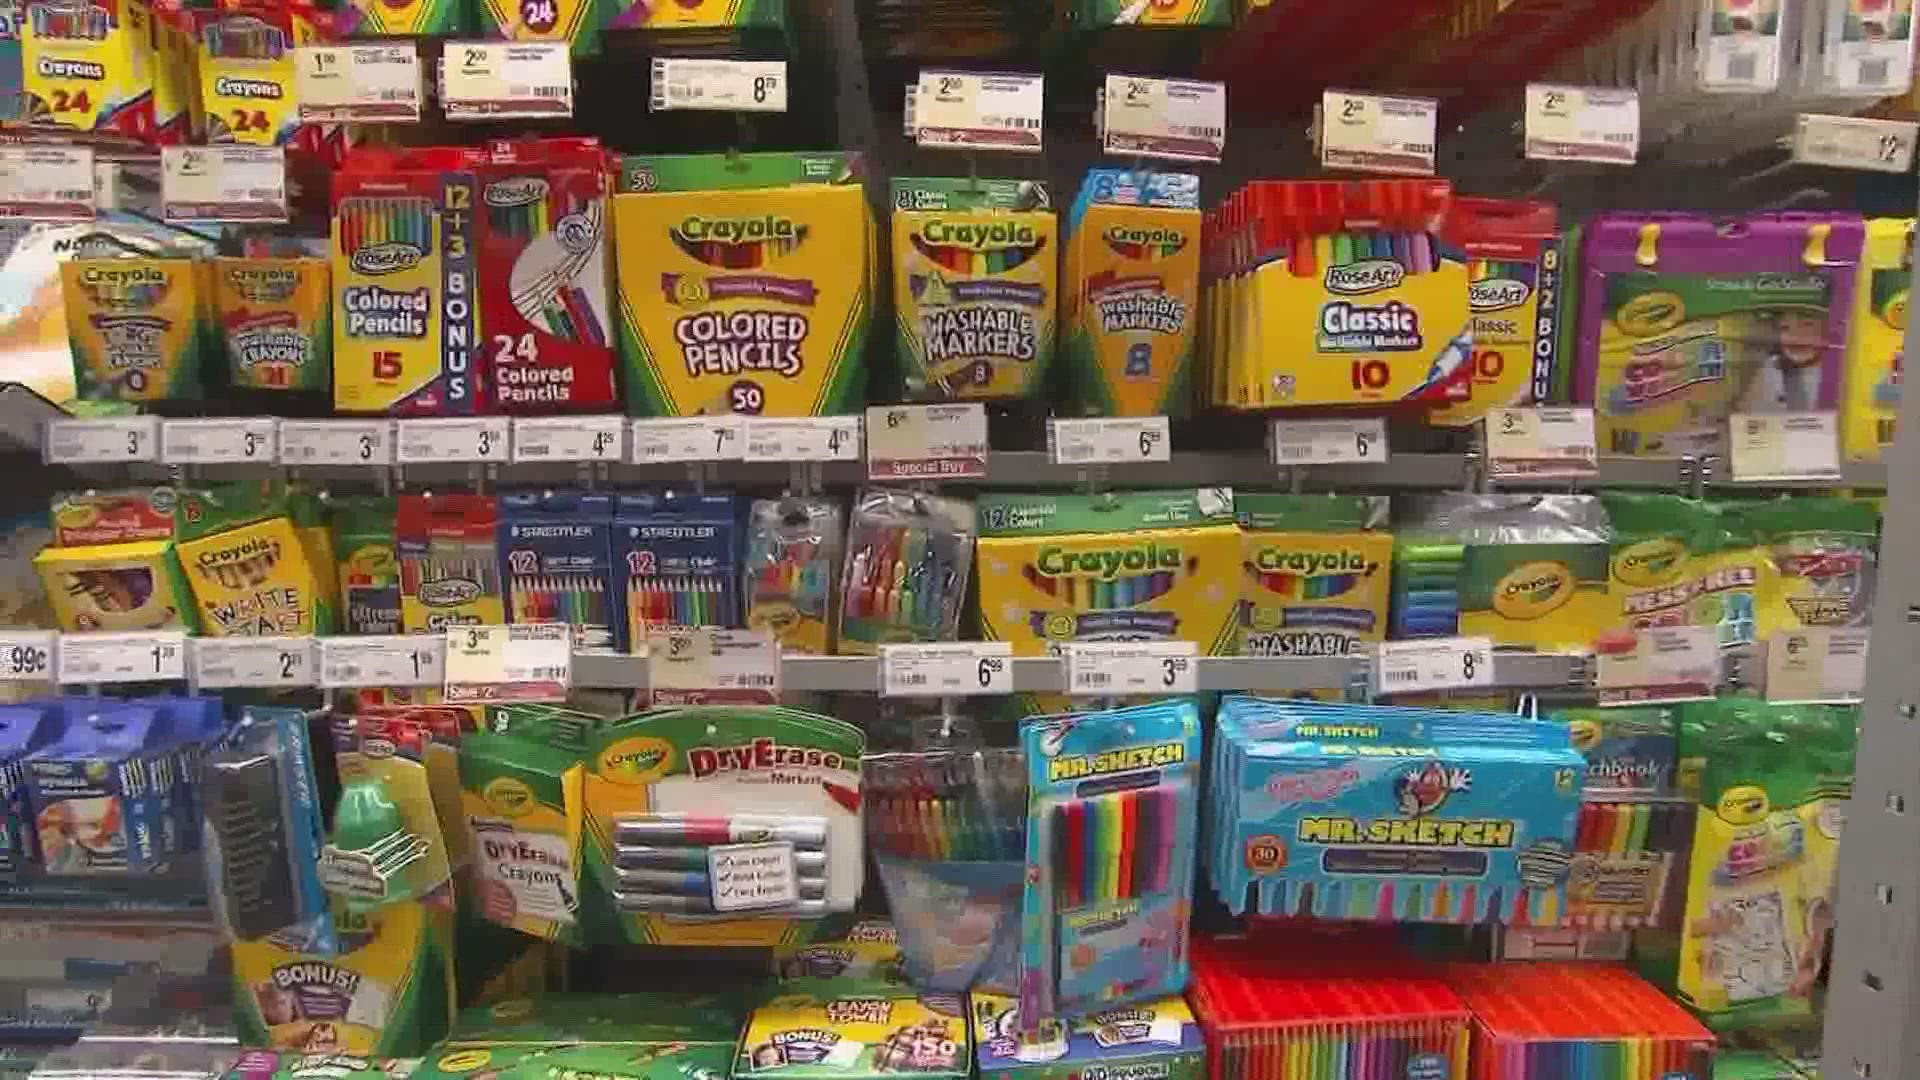 A survey from U.S. News and World Report finds that two-thirds of parents plan to cut back on their children's back-to-school clothing and supplies out of necessity.